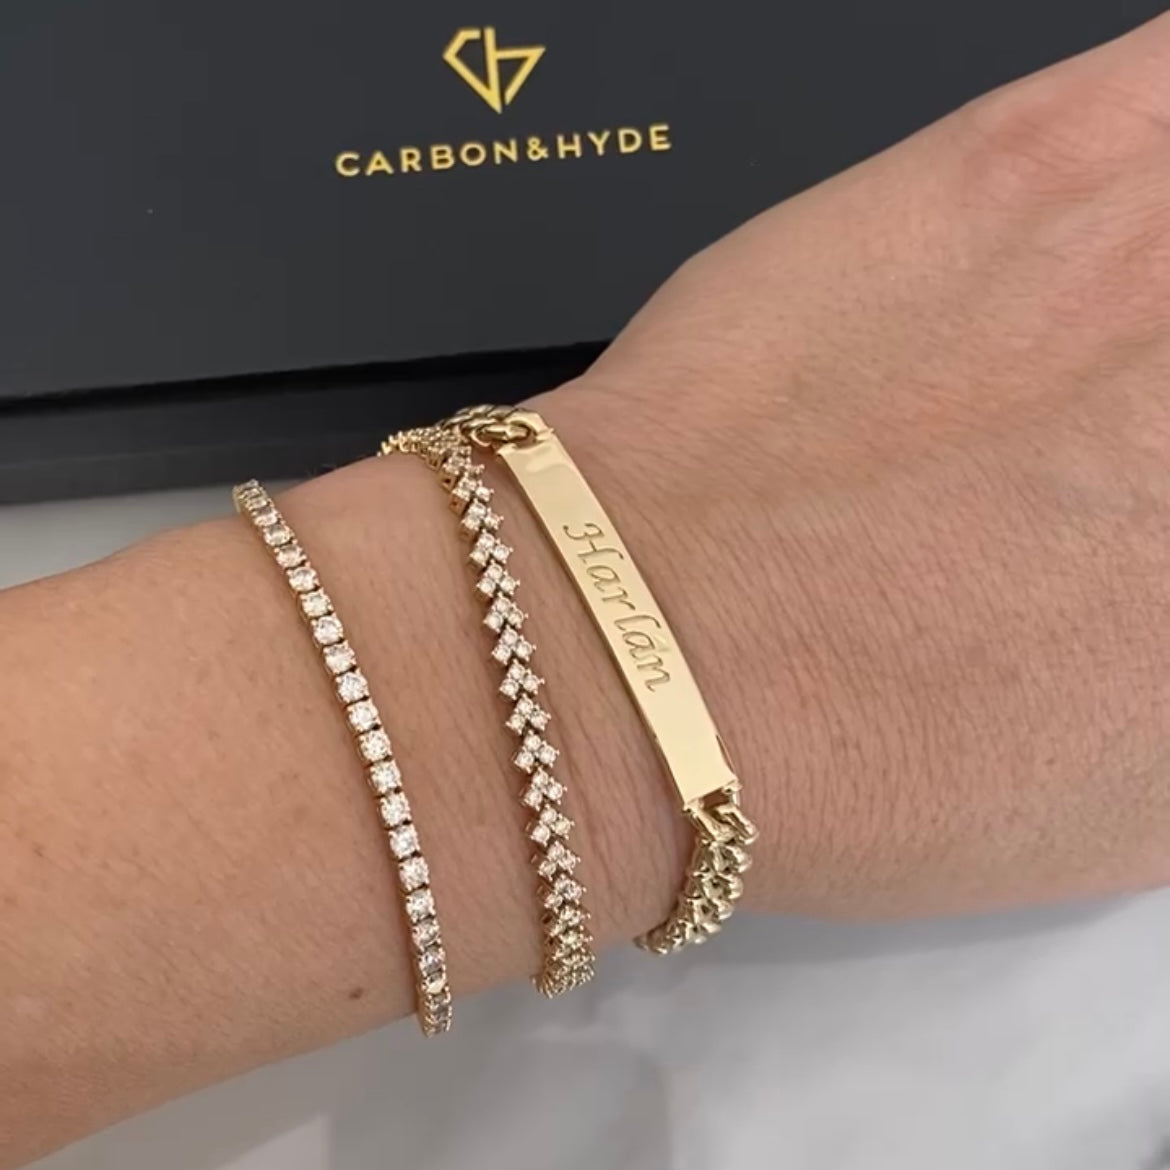 Tag Bracelet shown in Yellow Gold with "Harlan" engraving